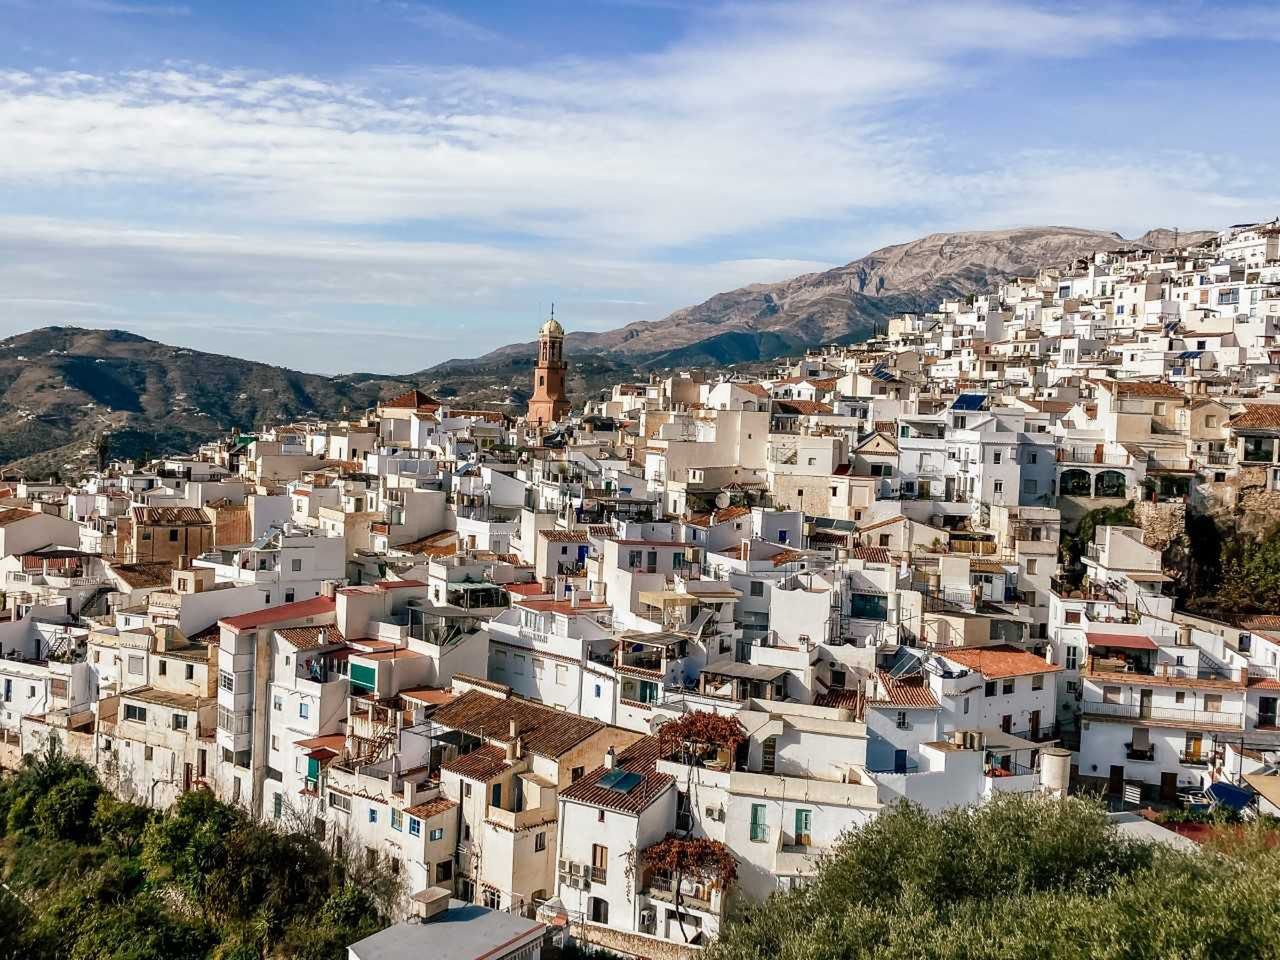 White towns are a true attraction of Andalusia.